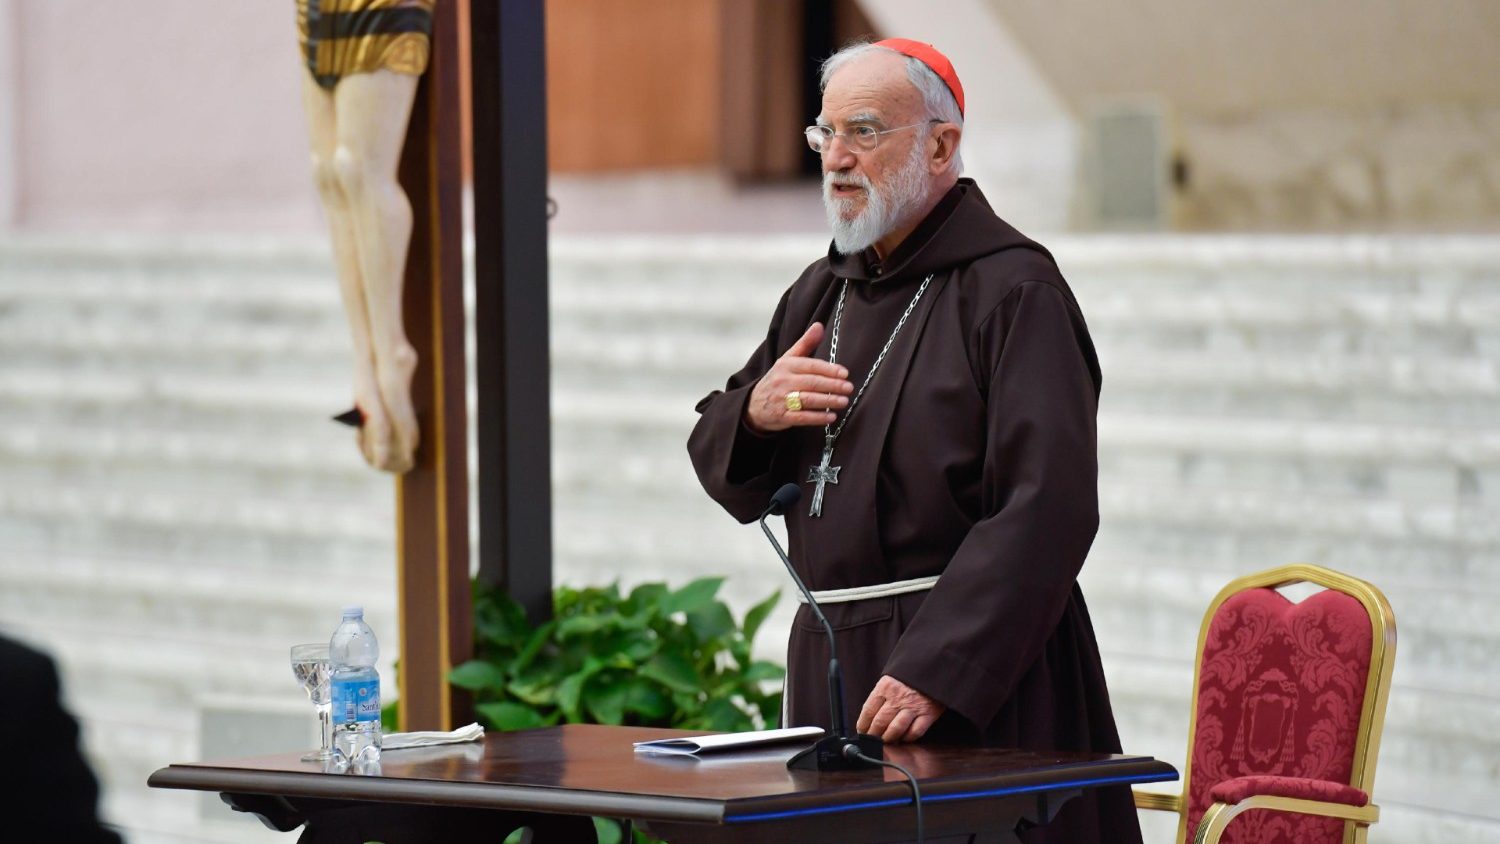 Cardinal Cantalamessa gives his first sermon for Lent 2021